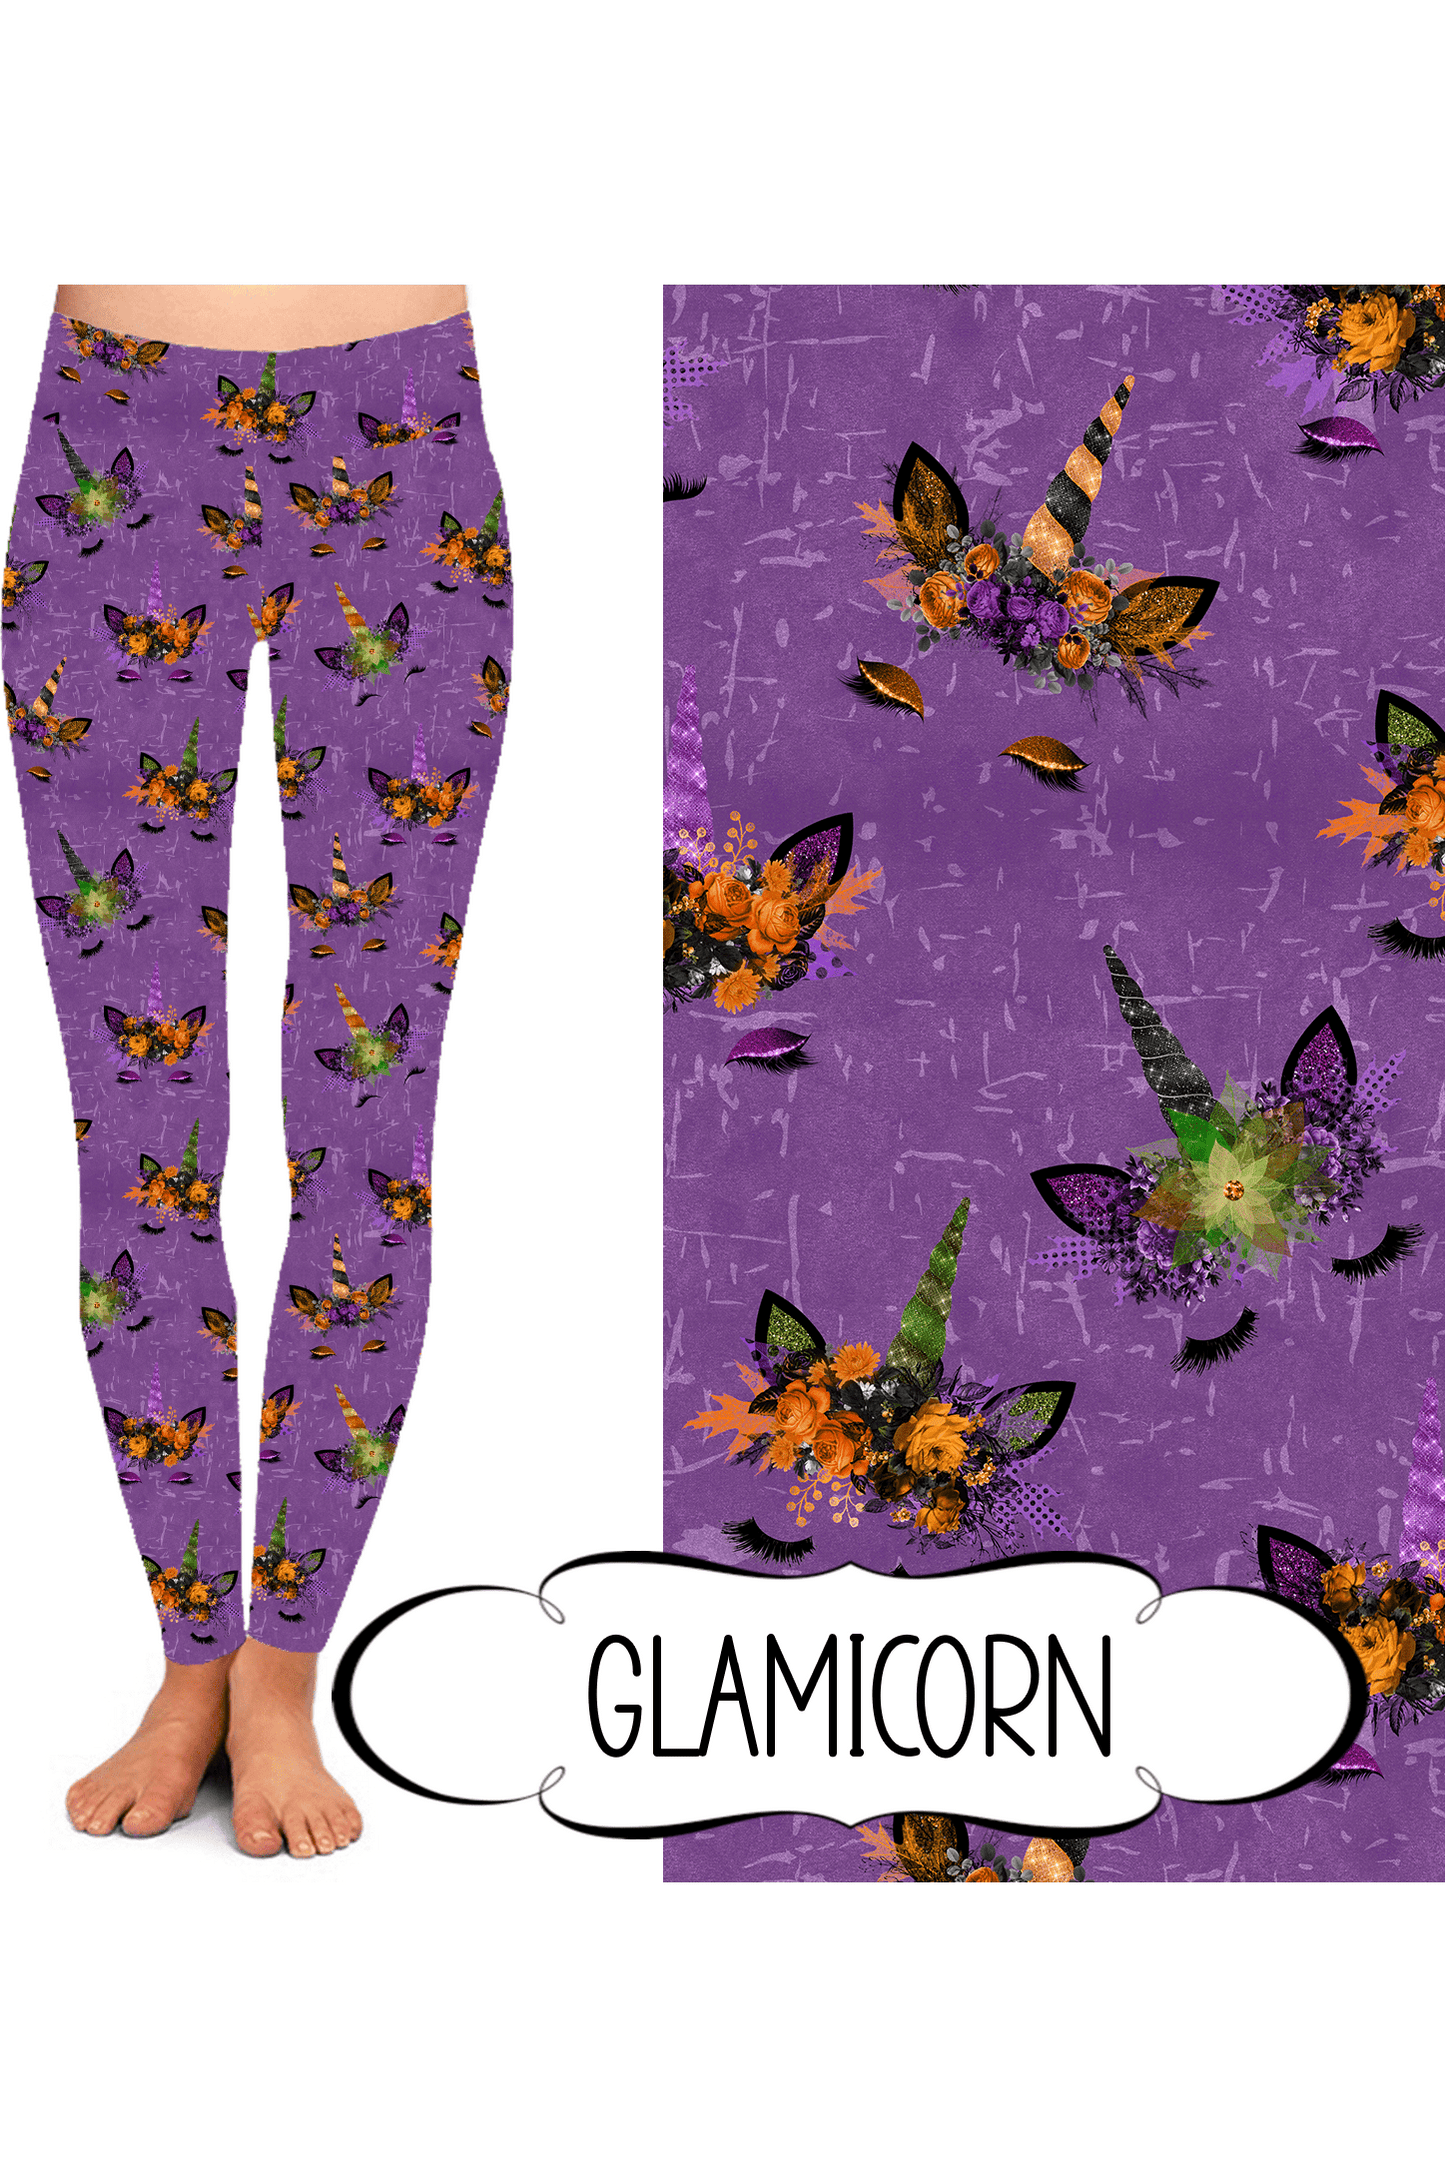 Yoga Style Leggings - Glamicorn by Eleven & Co.